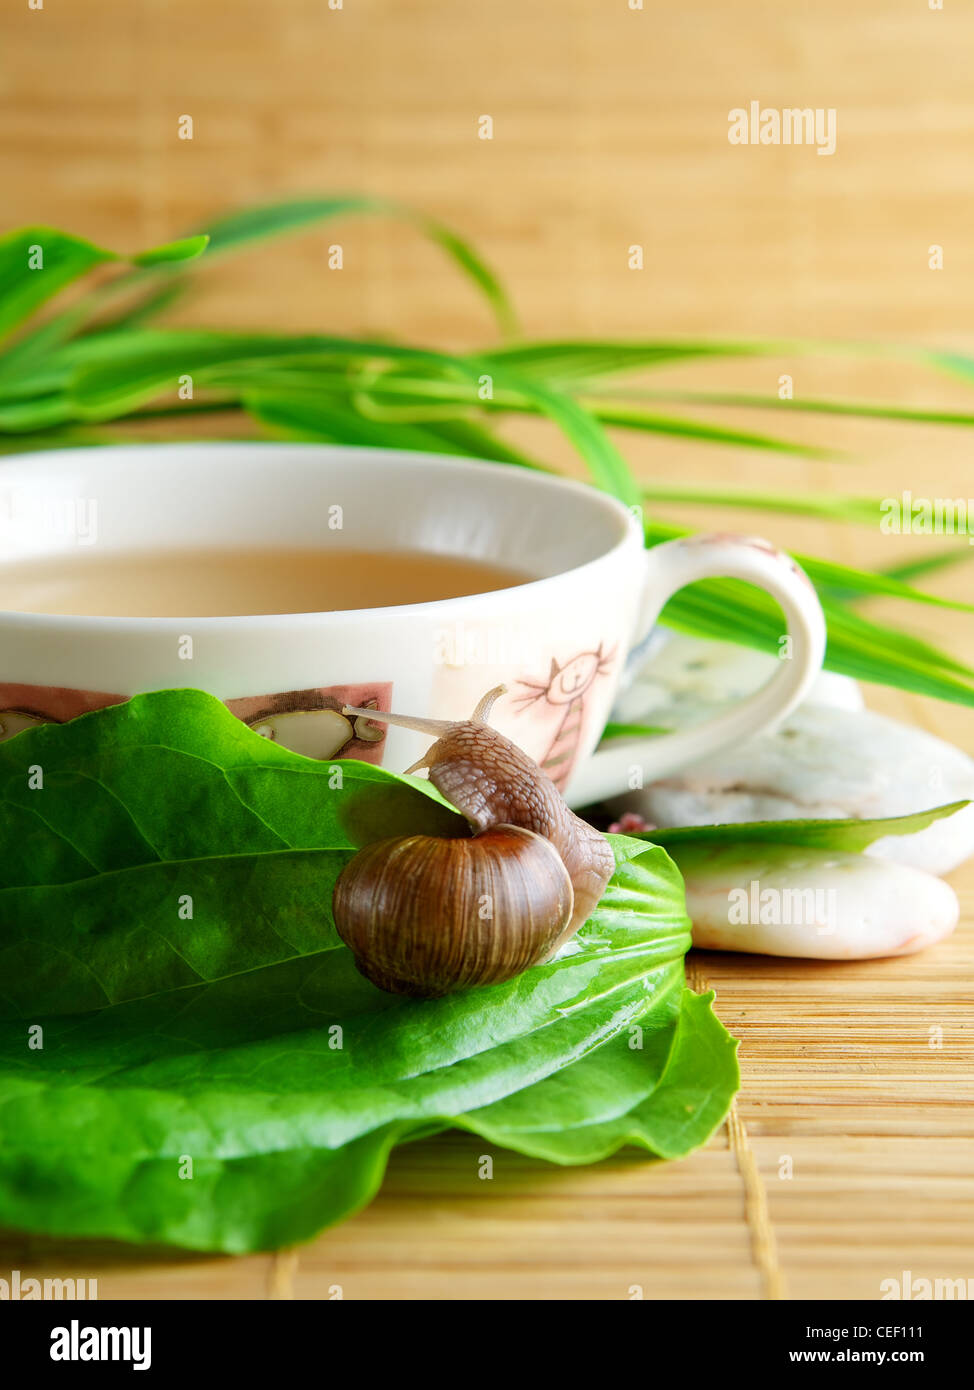 Green tea cup and snail Stock Photo